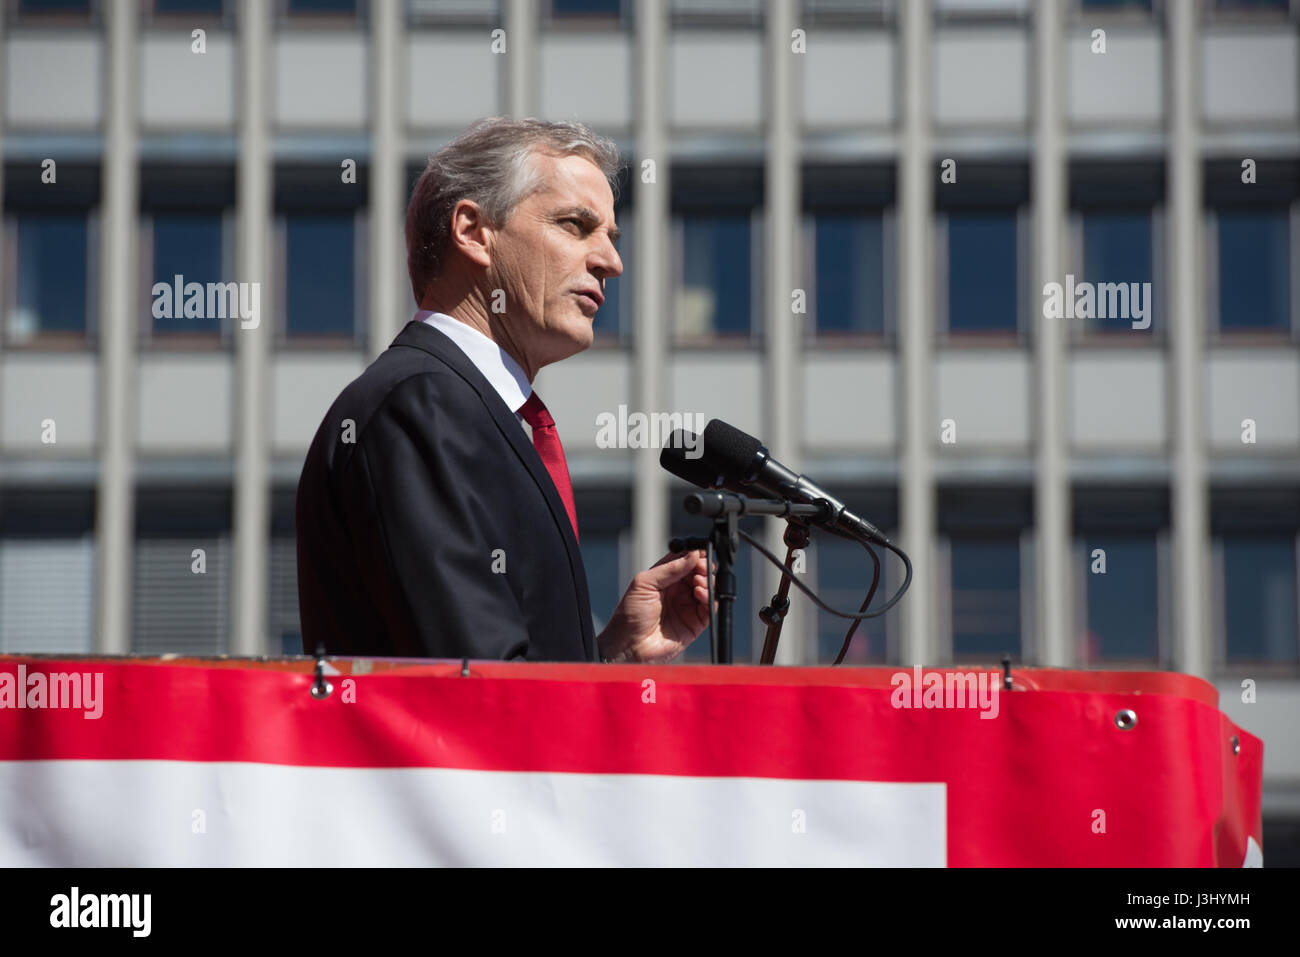 Norwegian Labor Party leader Jonas Gahr Støre attends the annual May Day celebration in Oslo, Norway, May 1, 2017. Gahr Støre could become Norway's next prime minister if his party wins national elections in September. Stock Photo